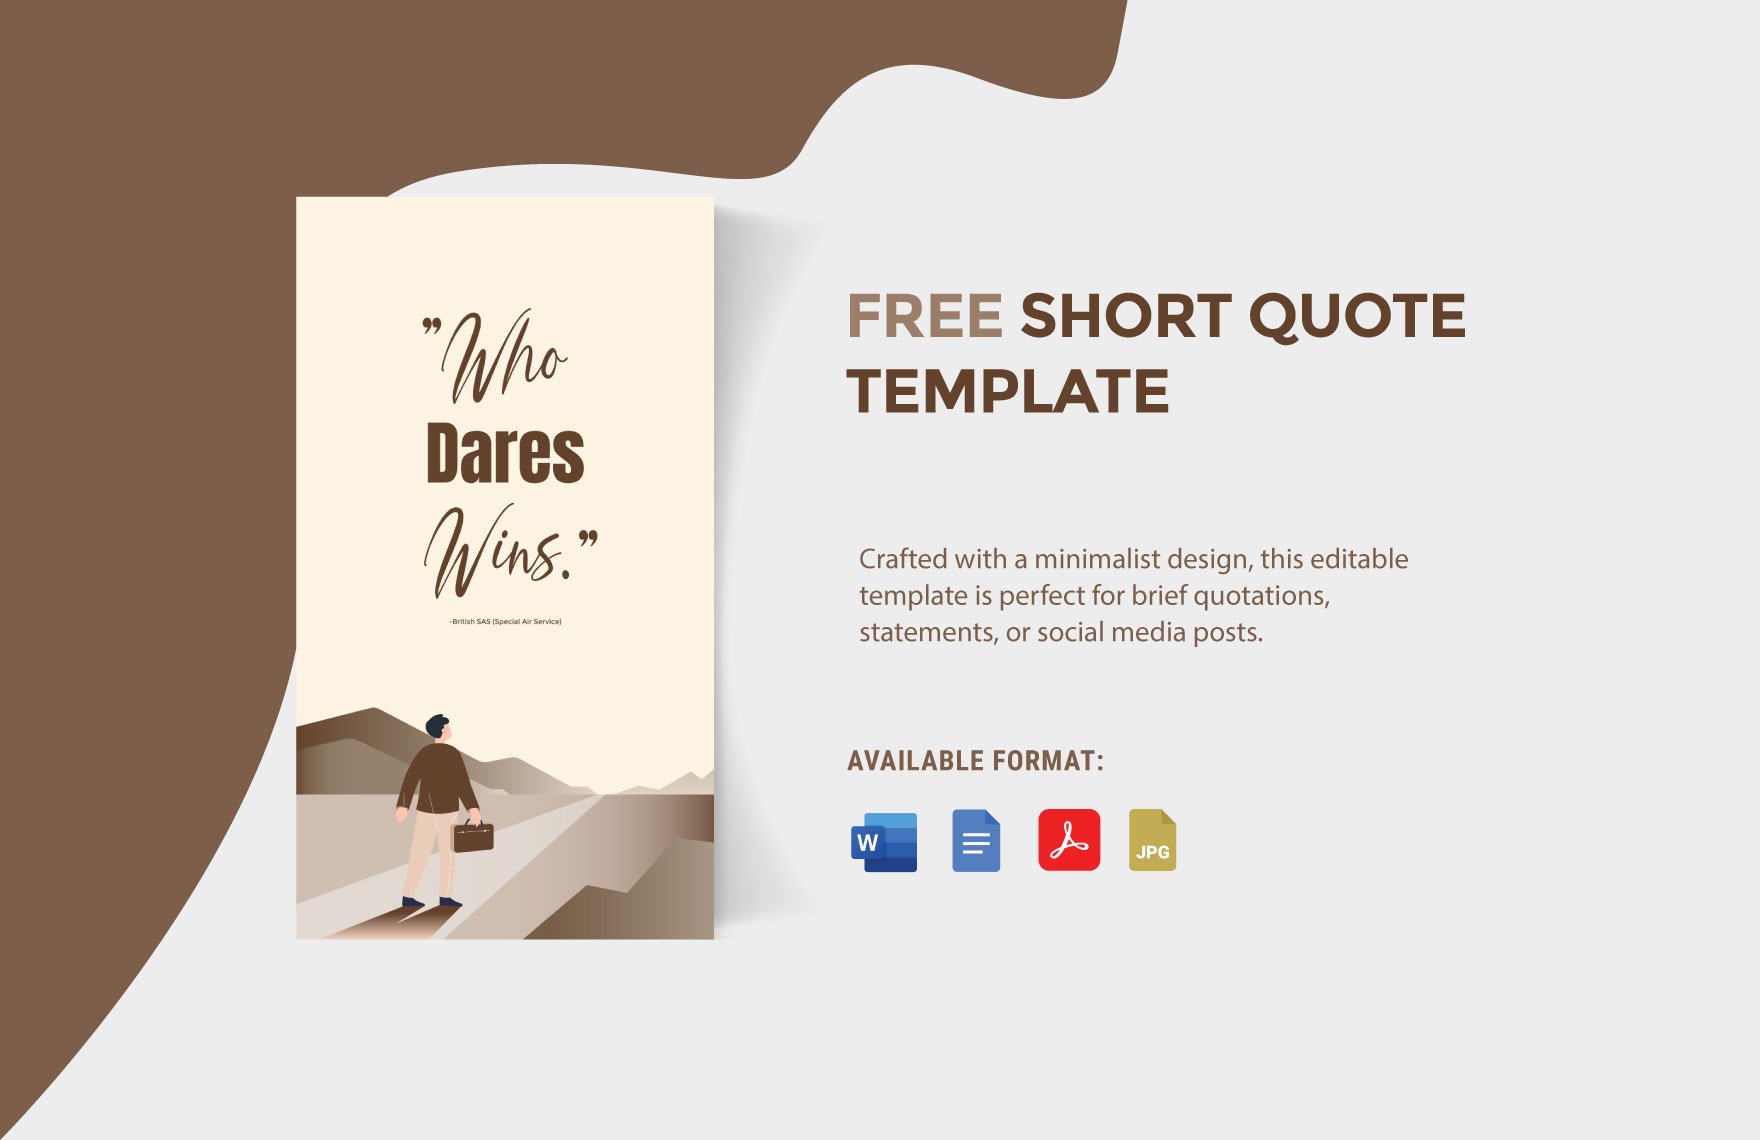 Free Short Quote Template in Word, Google Docs, PDF, JPG